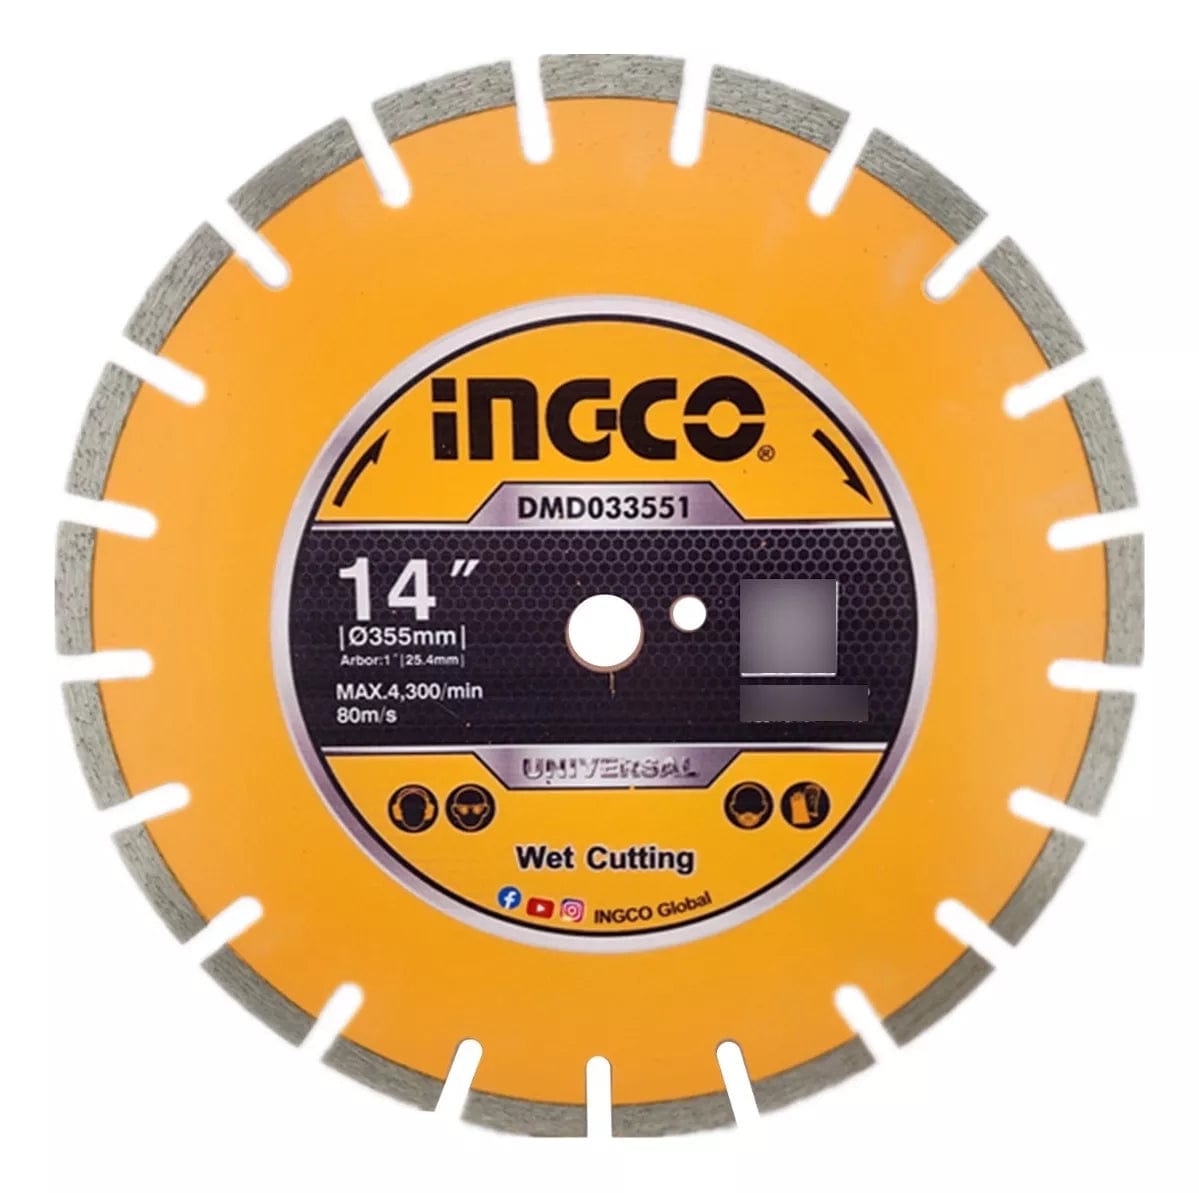 Total Dry Diamond Disc 9'' - TAC21123033 | Supply Master Accra, Ghana Grinding & Cutting Wheels Buy Tools hardware Building materials